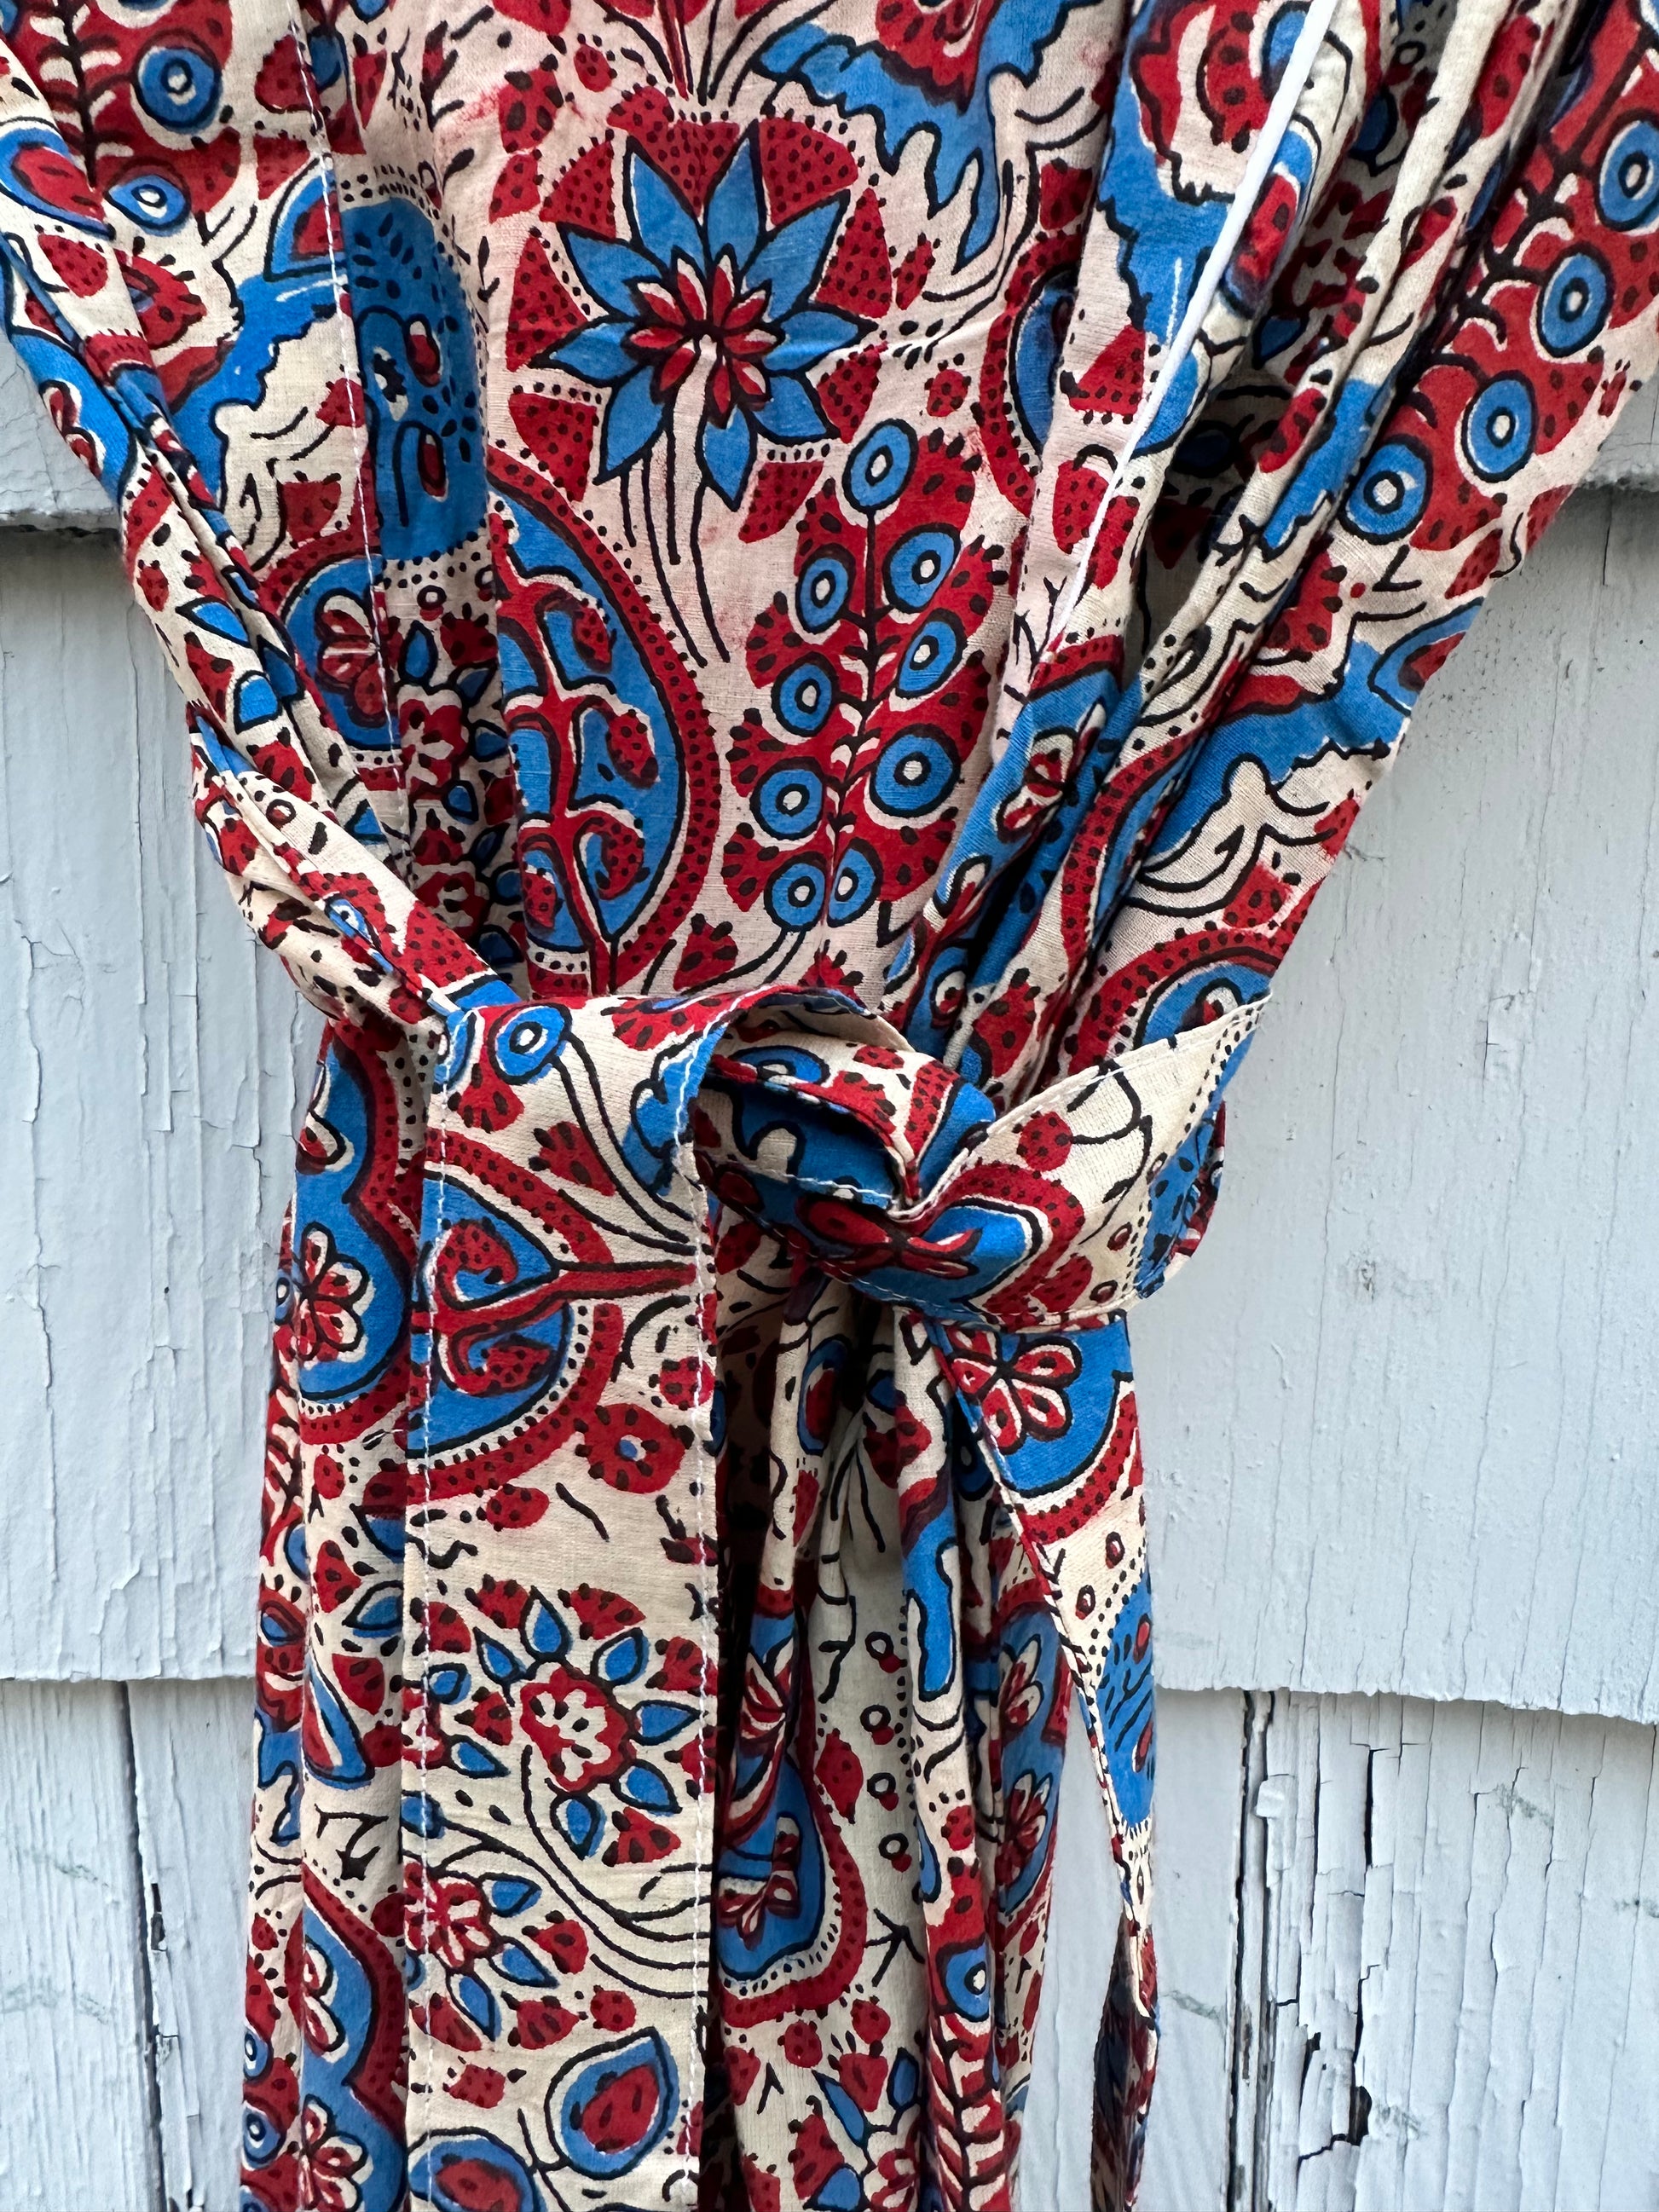 Hand-block Printed Kimono Robes in Red, Blue and Off-white - DharBazaar